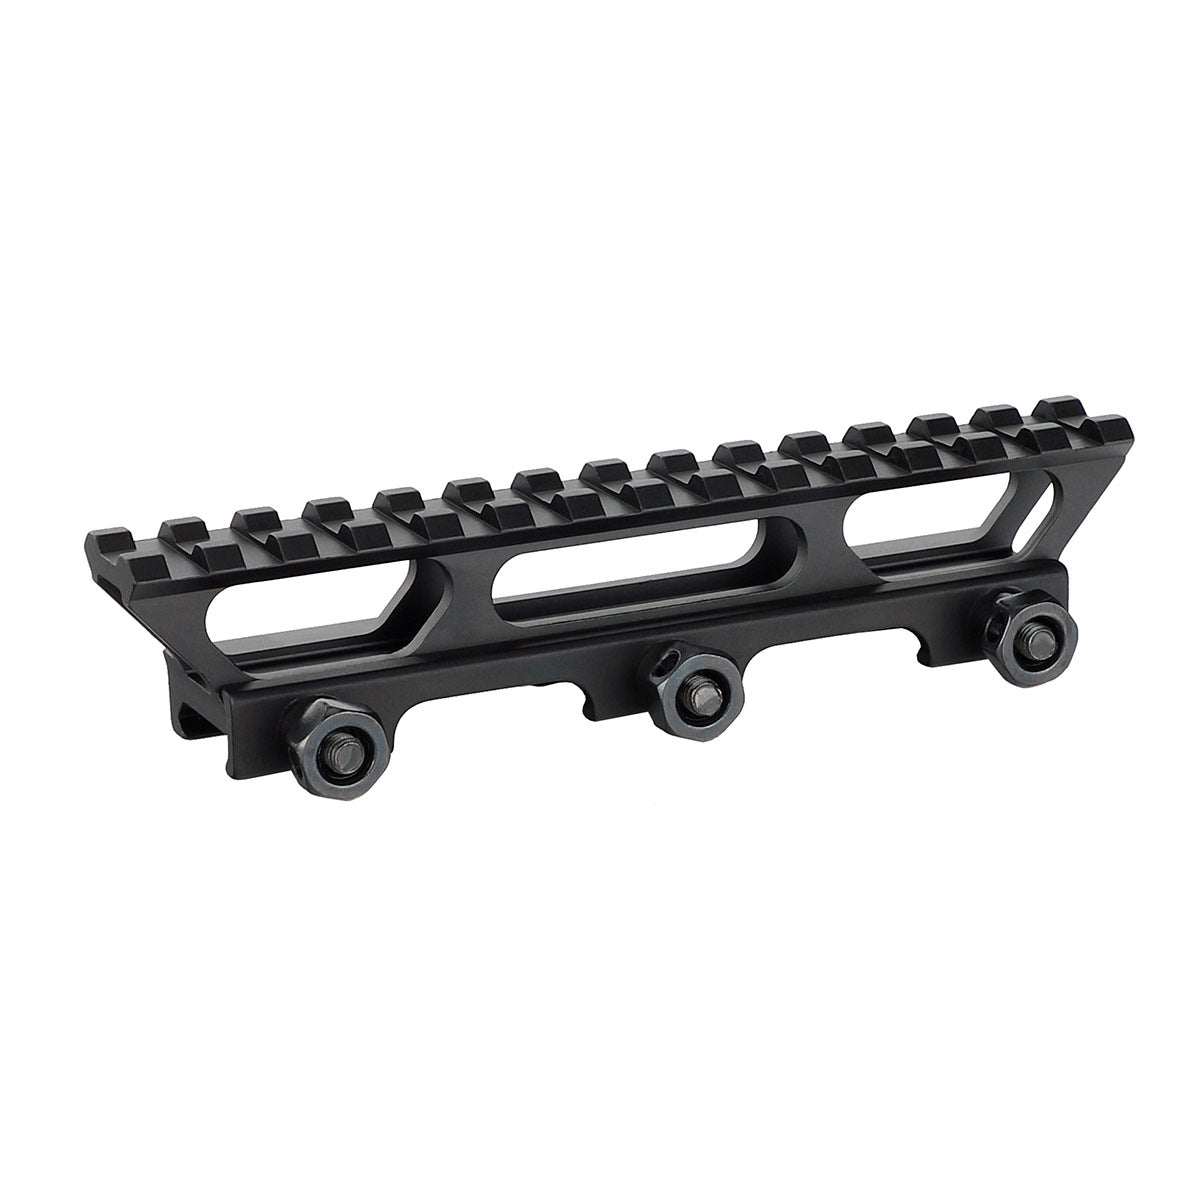 ohhunt Cantilever Picatinny Scope Riser Mount for AR - High Profile 5.7 inch L/ 14 Slot